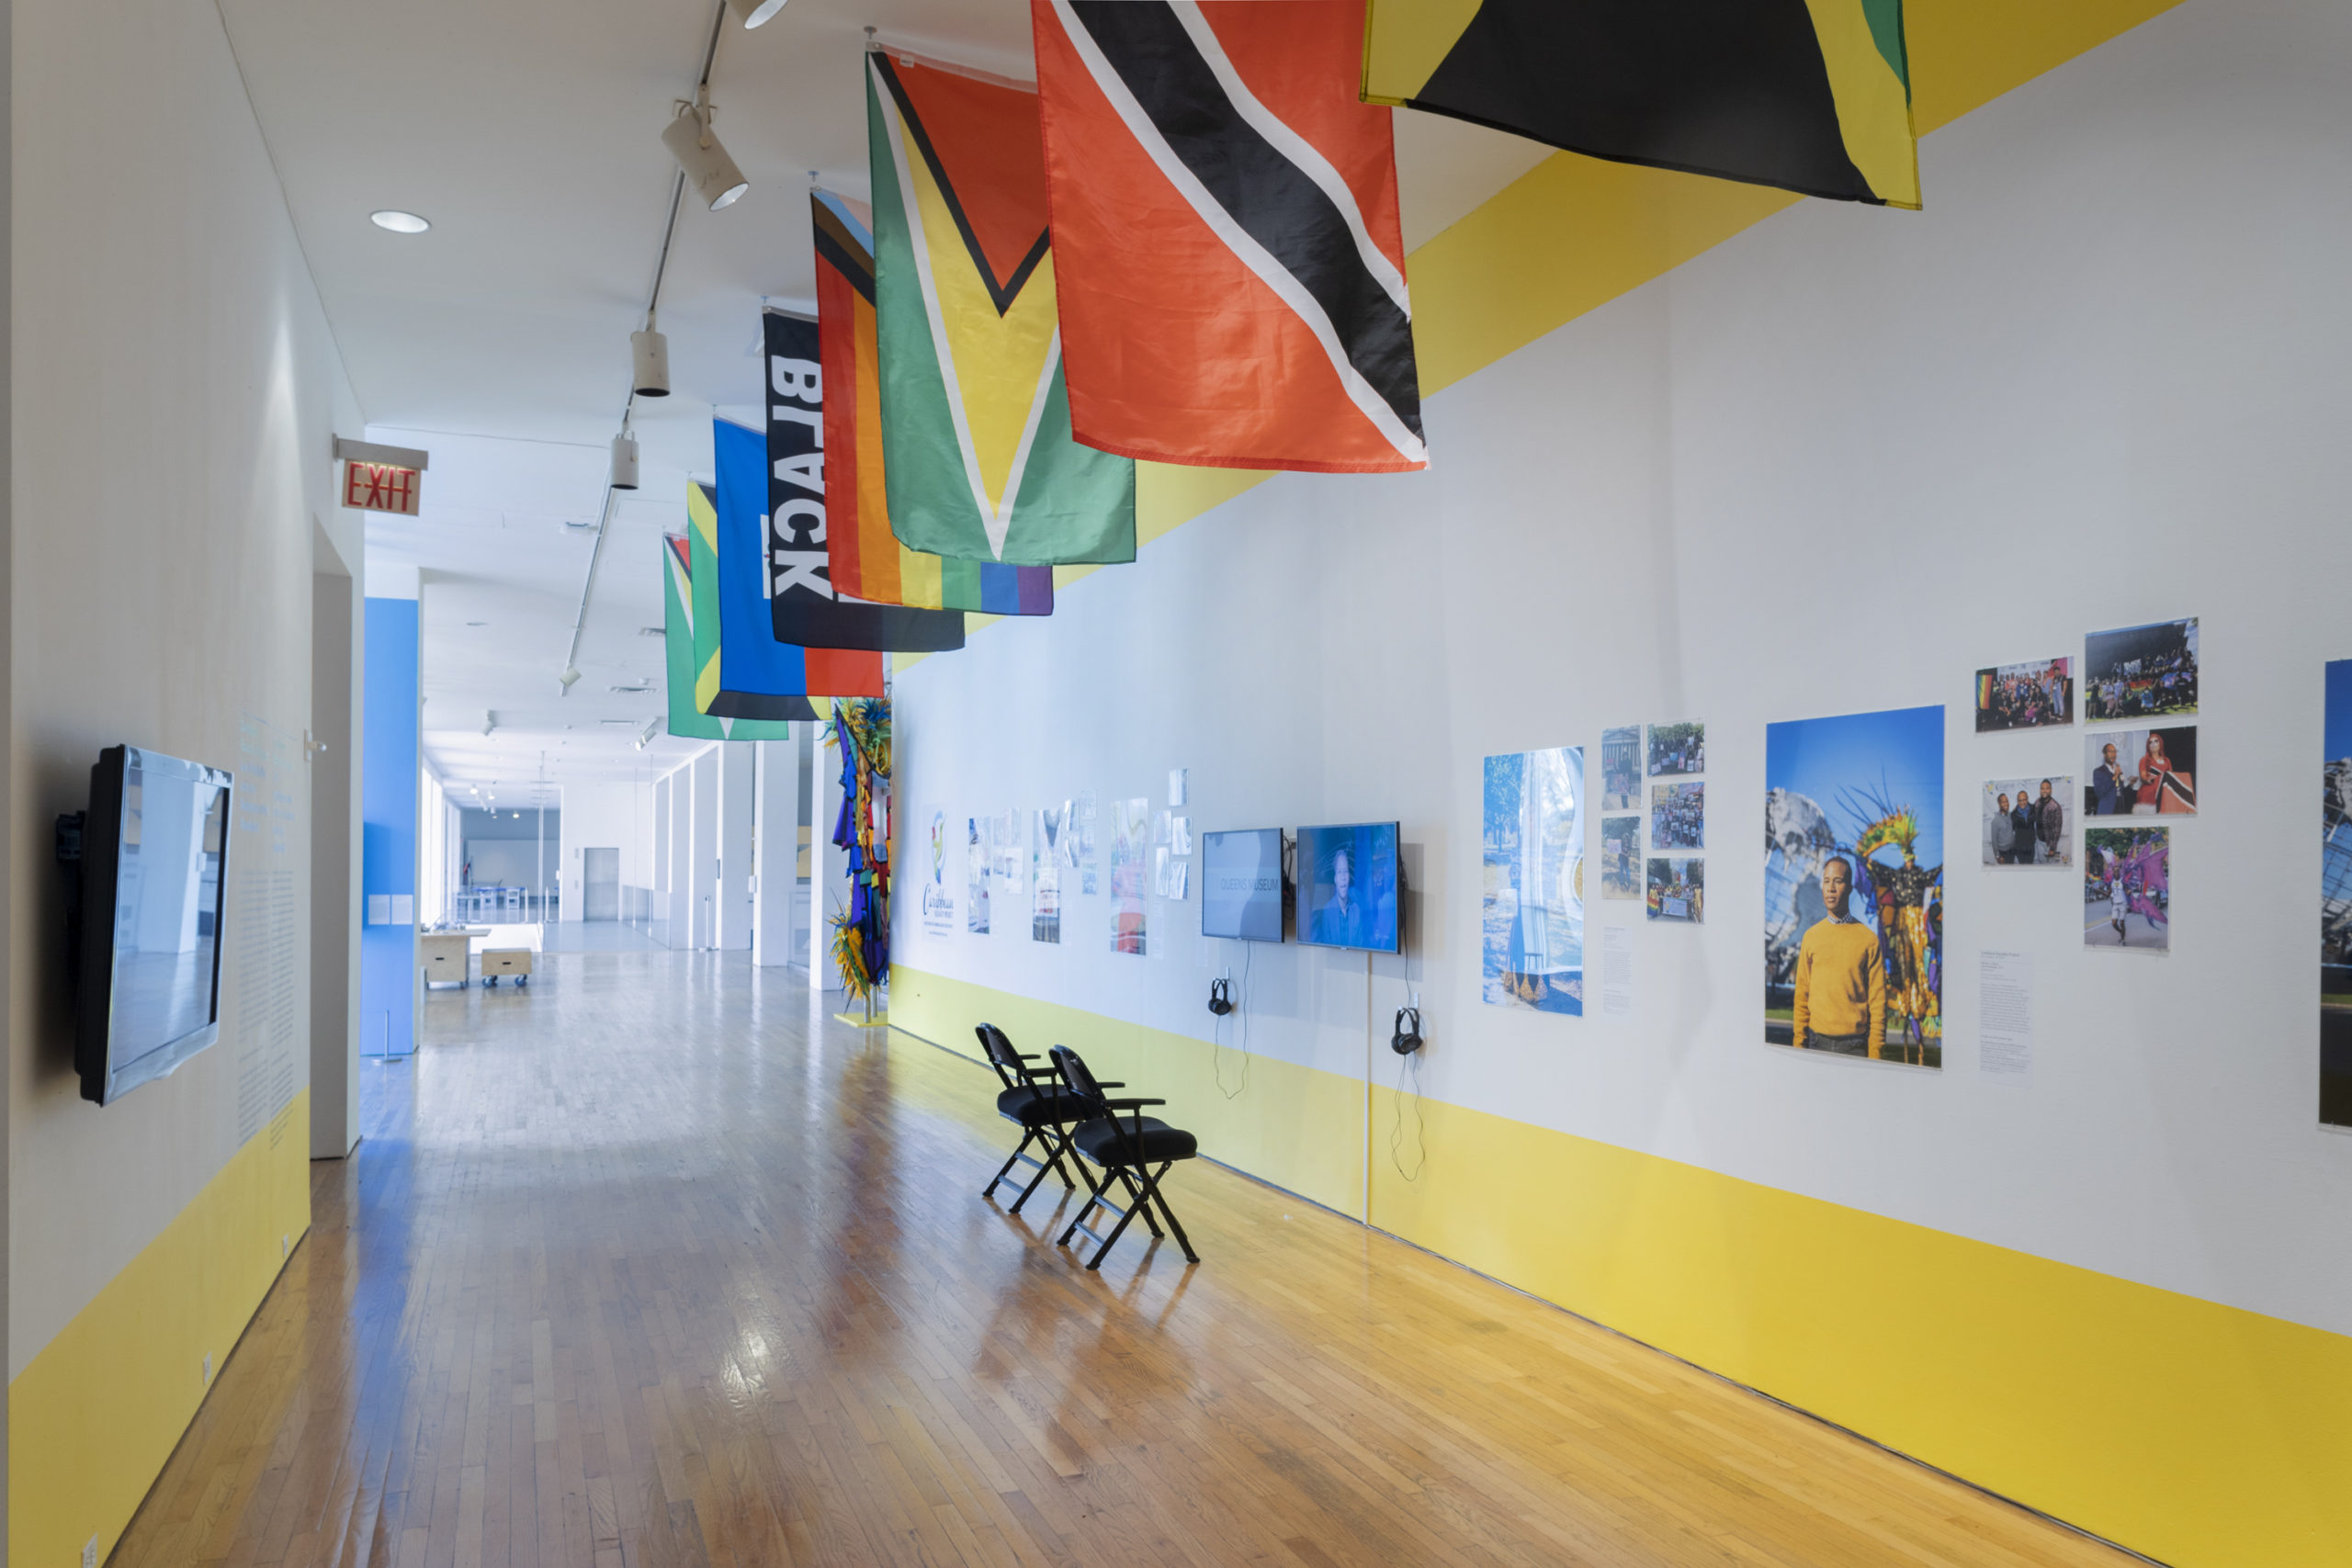 A exhibition hallway with white walls bordered with a yellow stripe at the top and bottom. The wall on the left has exhibition text and a monitor. The wall on the right has two monitors, portraits of community members and photographs of community events from The Caribbean Equality Project.